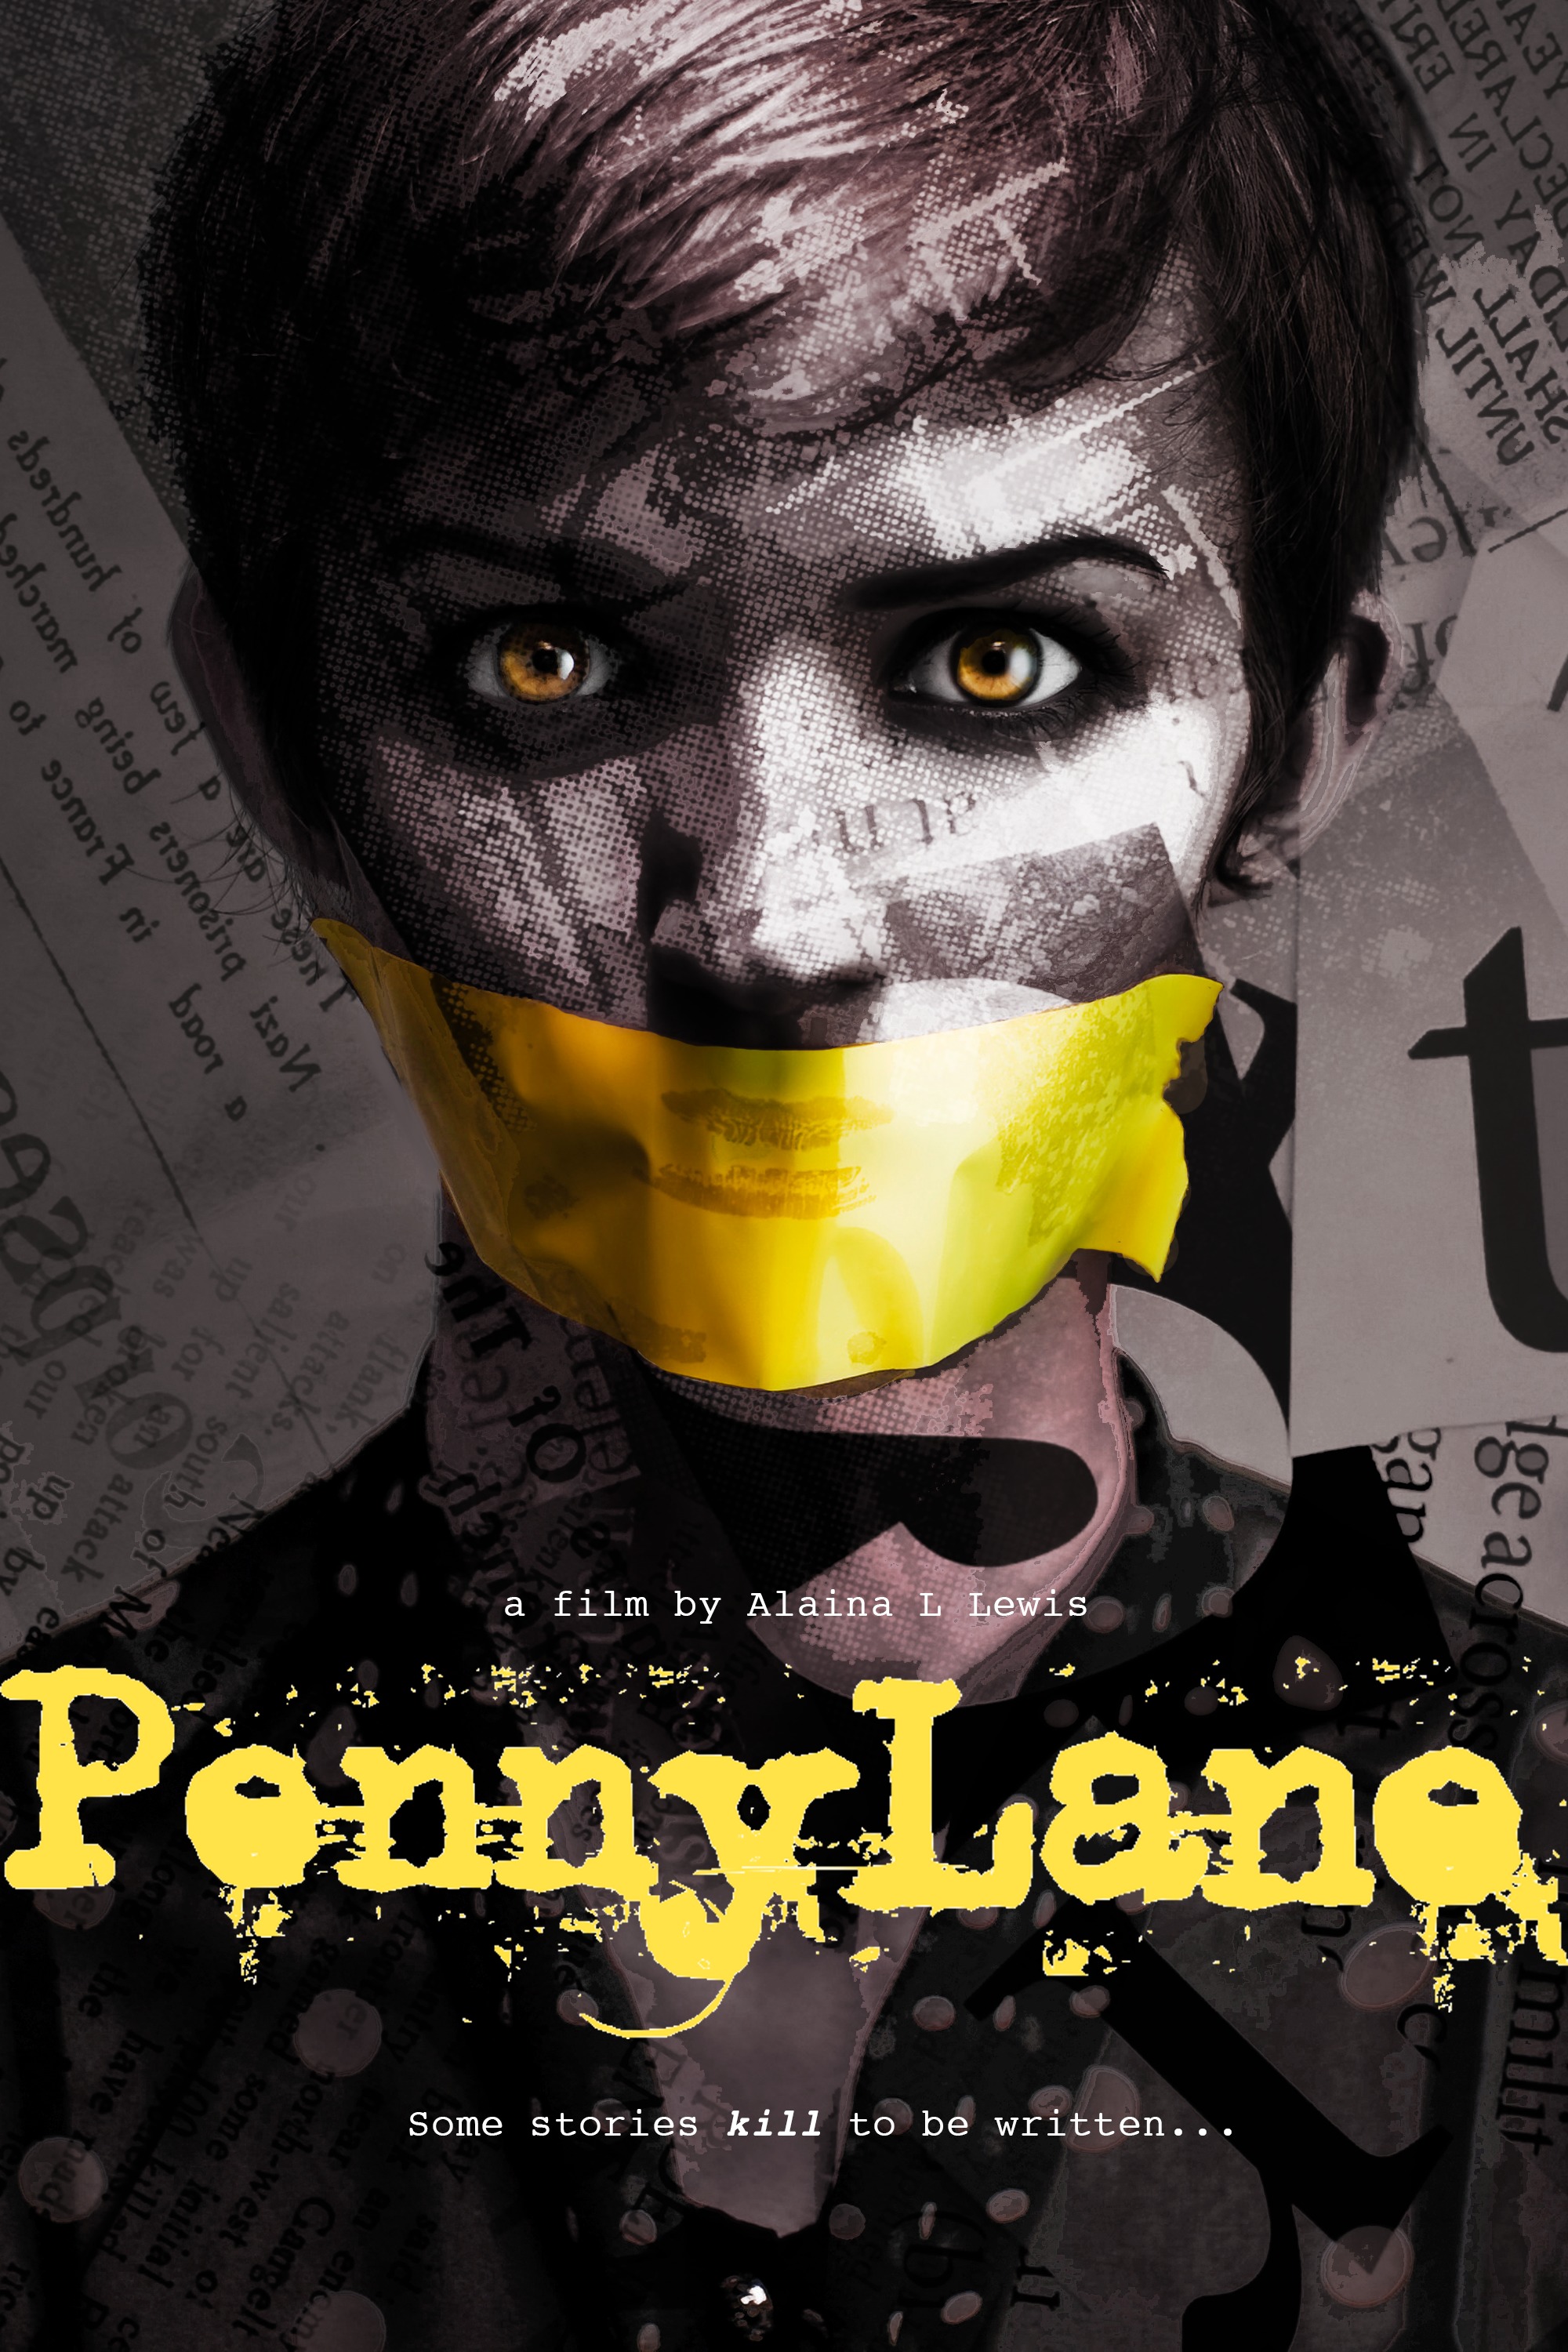 Penny Lane, feature film in Pre-Production. Concept Trailer furnished upon request.